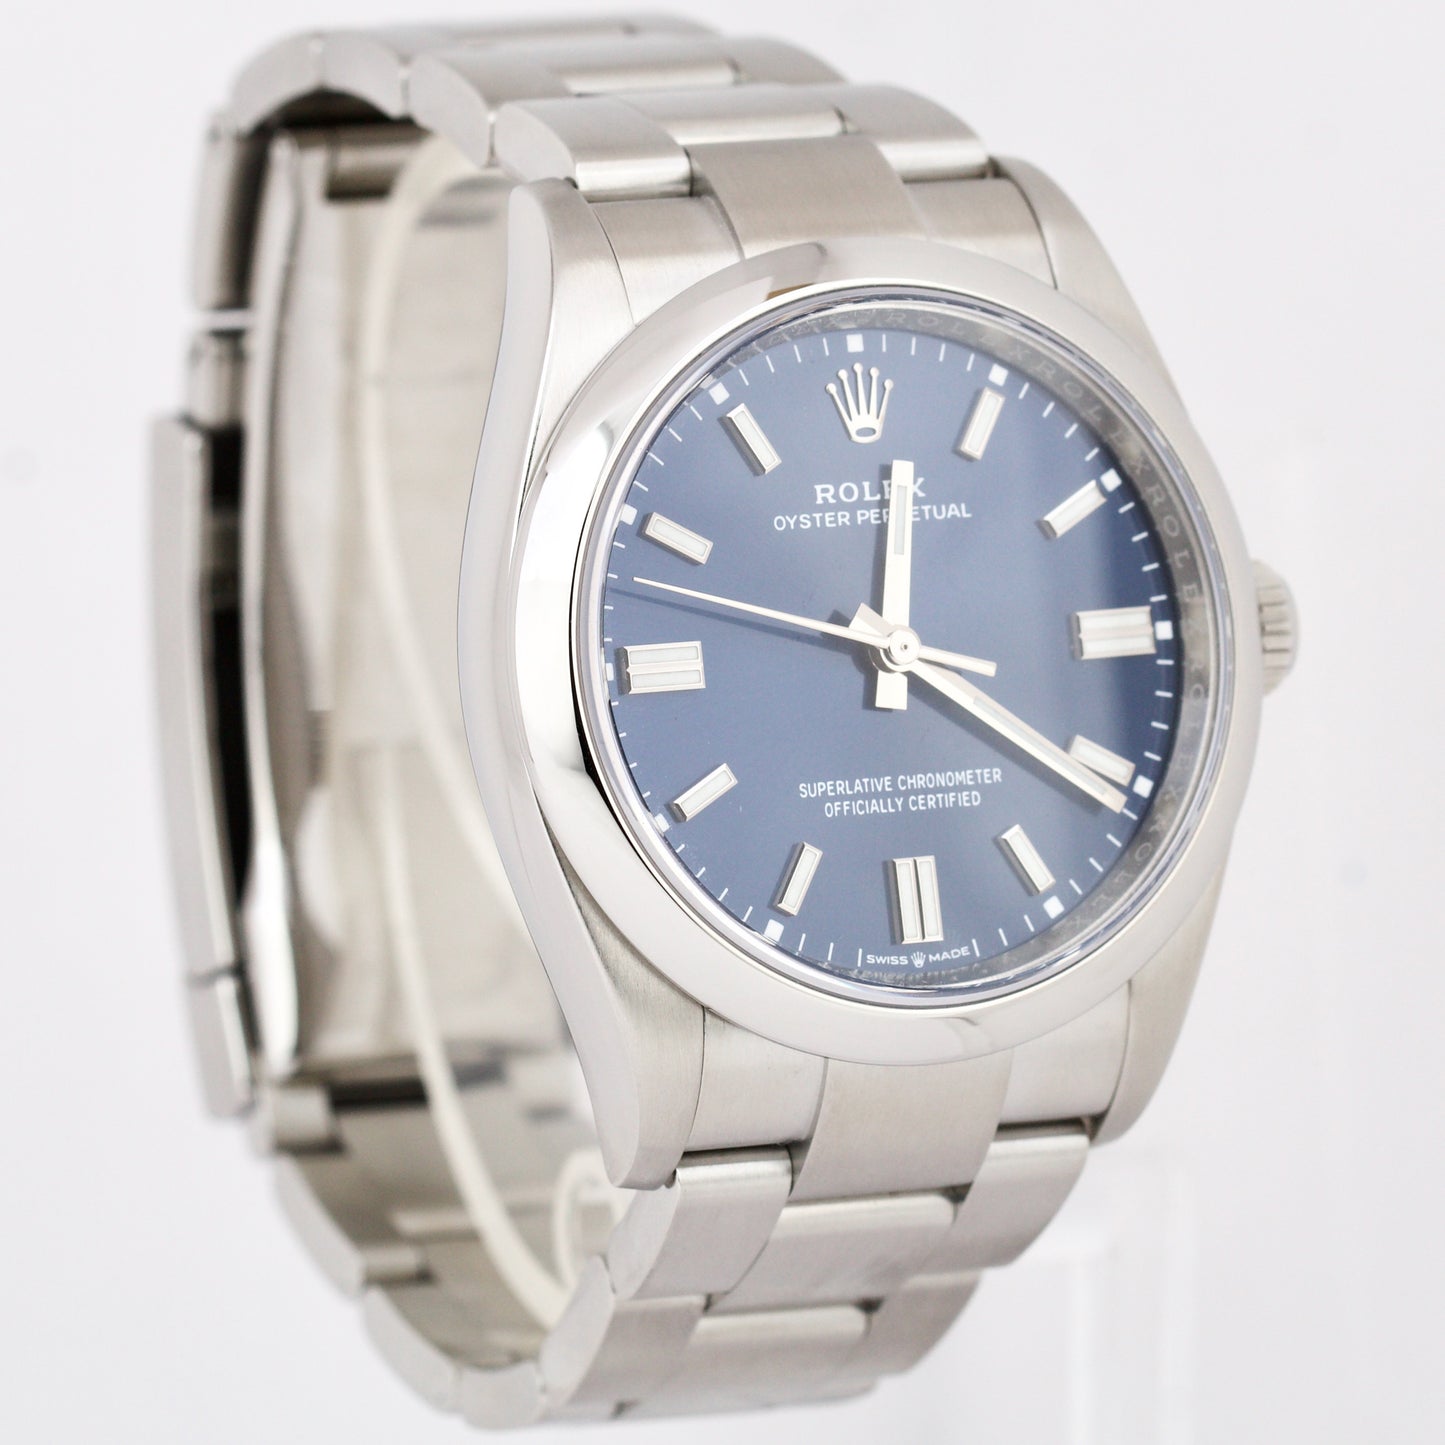 MINT 2020 PAPERS Rolex Oyster Perpetual BLUE 36mm Stainless Steel 126000 B+P